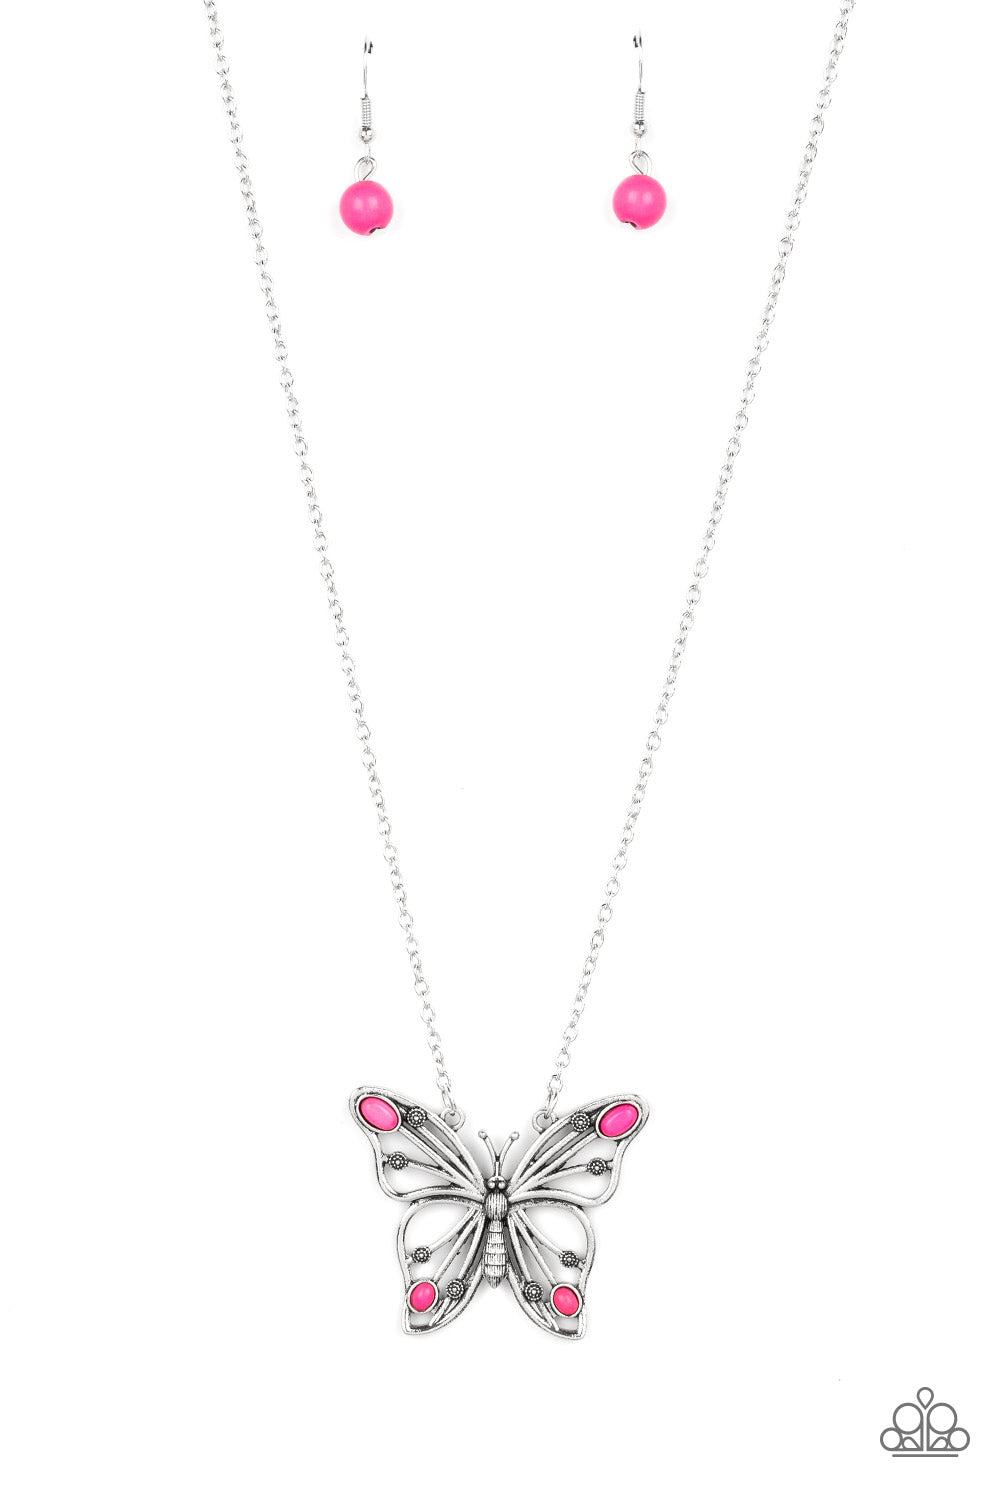 silver, silver jewelry, butterfly, necklace, medium necklace, butterfly jewelry, affordable jewelry, affordable holiday gift, everyday jewelry, pink, pink jewelry, trending jewelry, prom jewelry, wedding jewelry, viral jewelry, paparazzi accessories, stone, stone jewelry, jewelry stores, jewelry stores near me, 